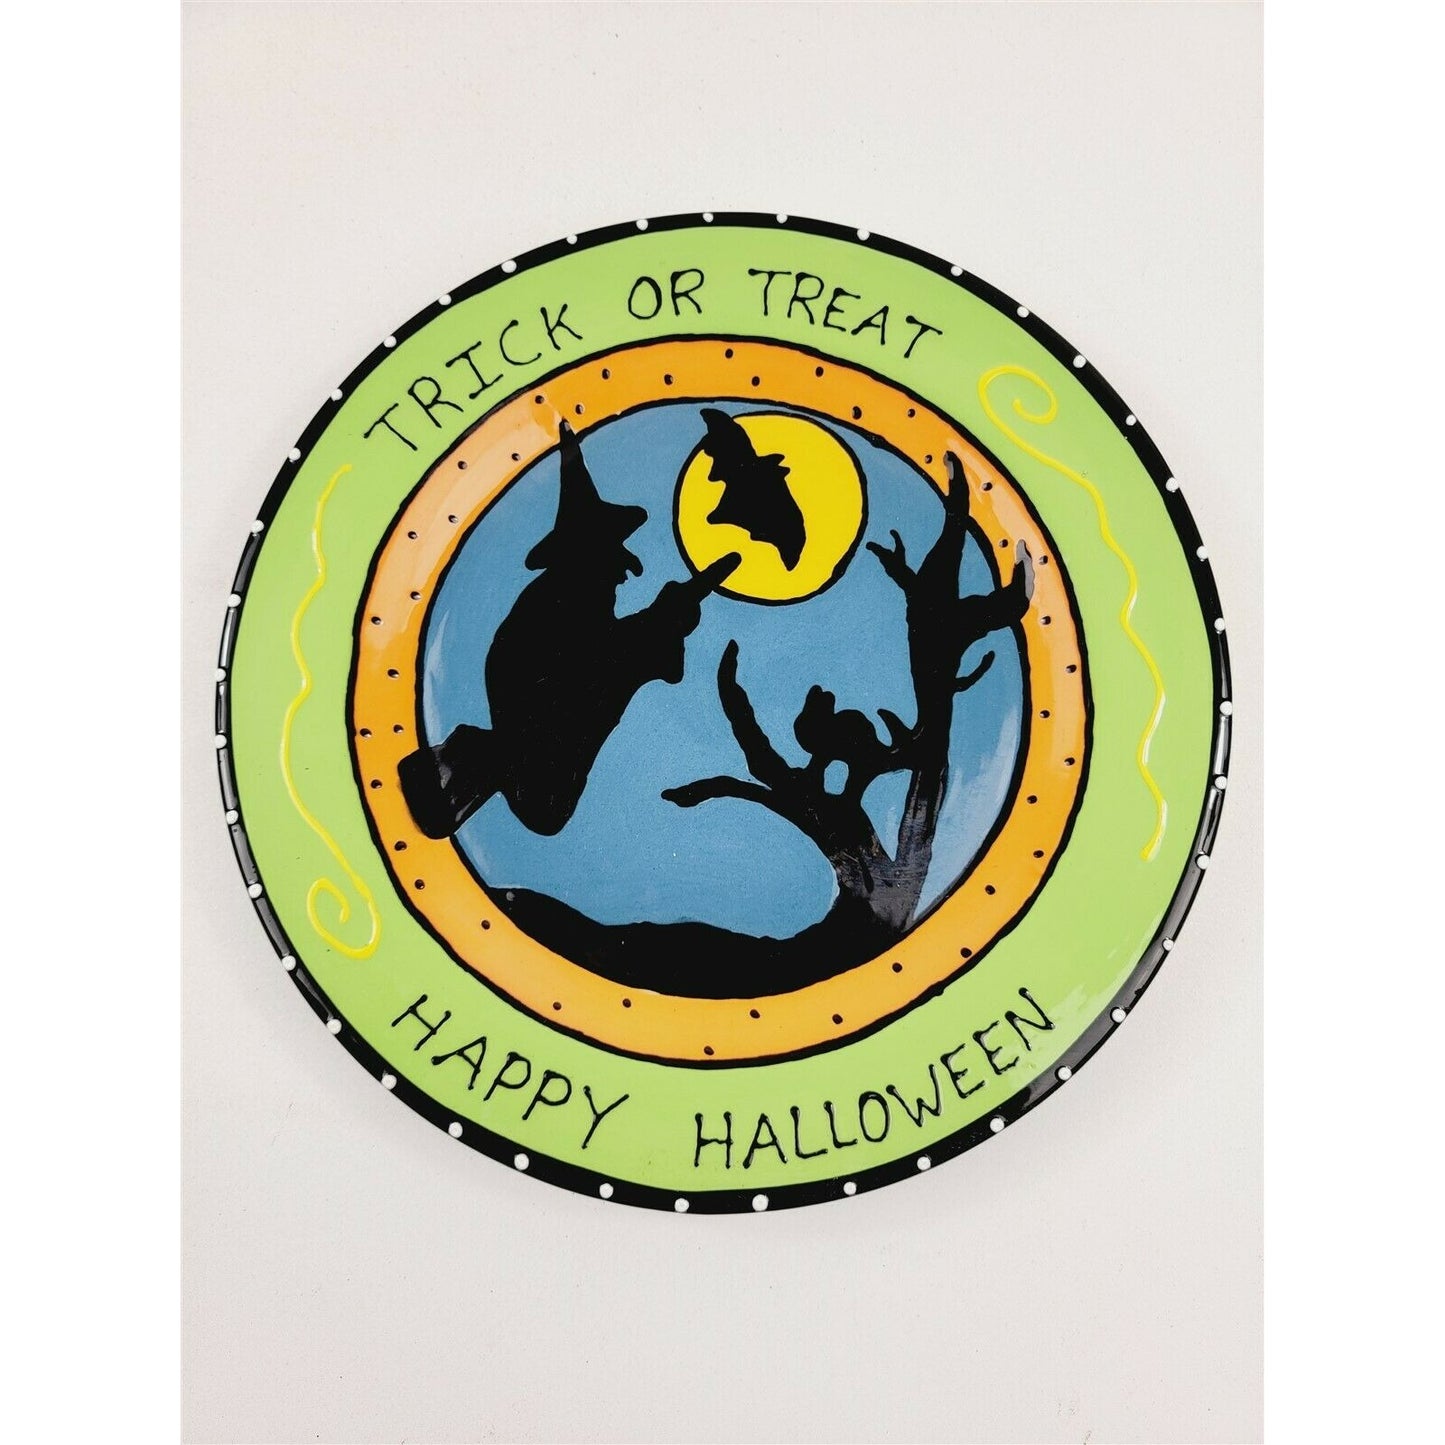 2 Hand Painted Happy Halloween Trick or Treat Plates Witch Spider Web Ghost Bat